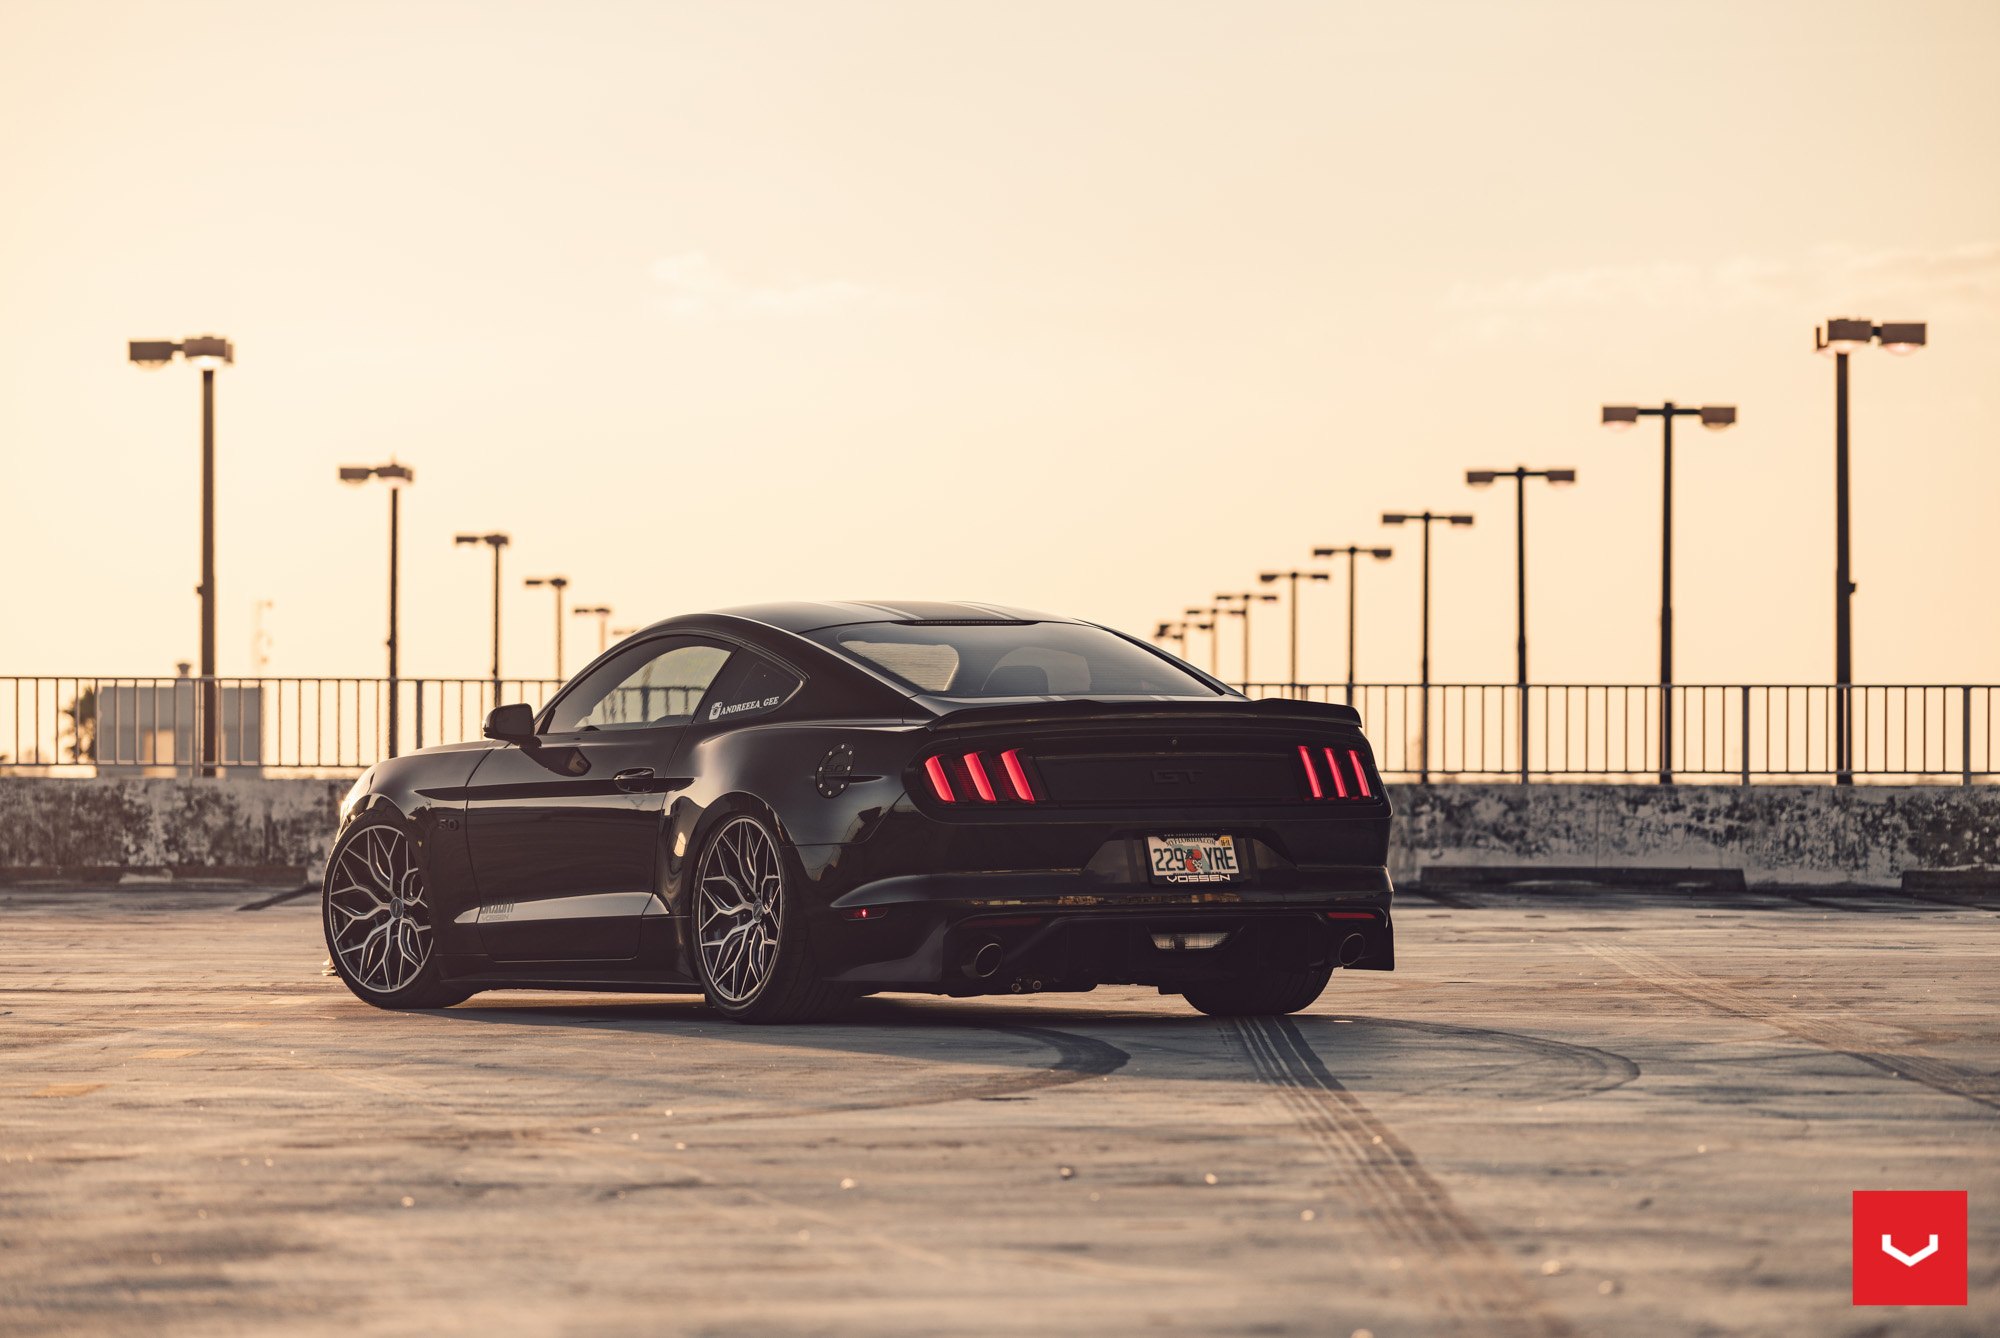 Black Ford Mustang with Custom Rear Diffuser - Photo by Vossen